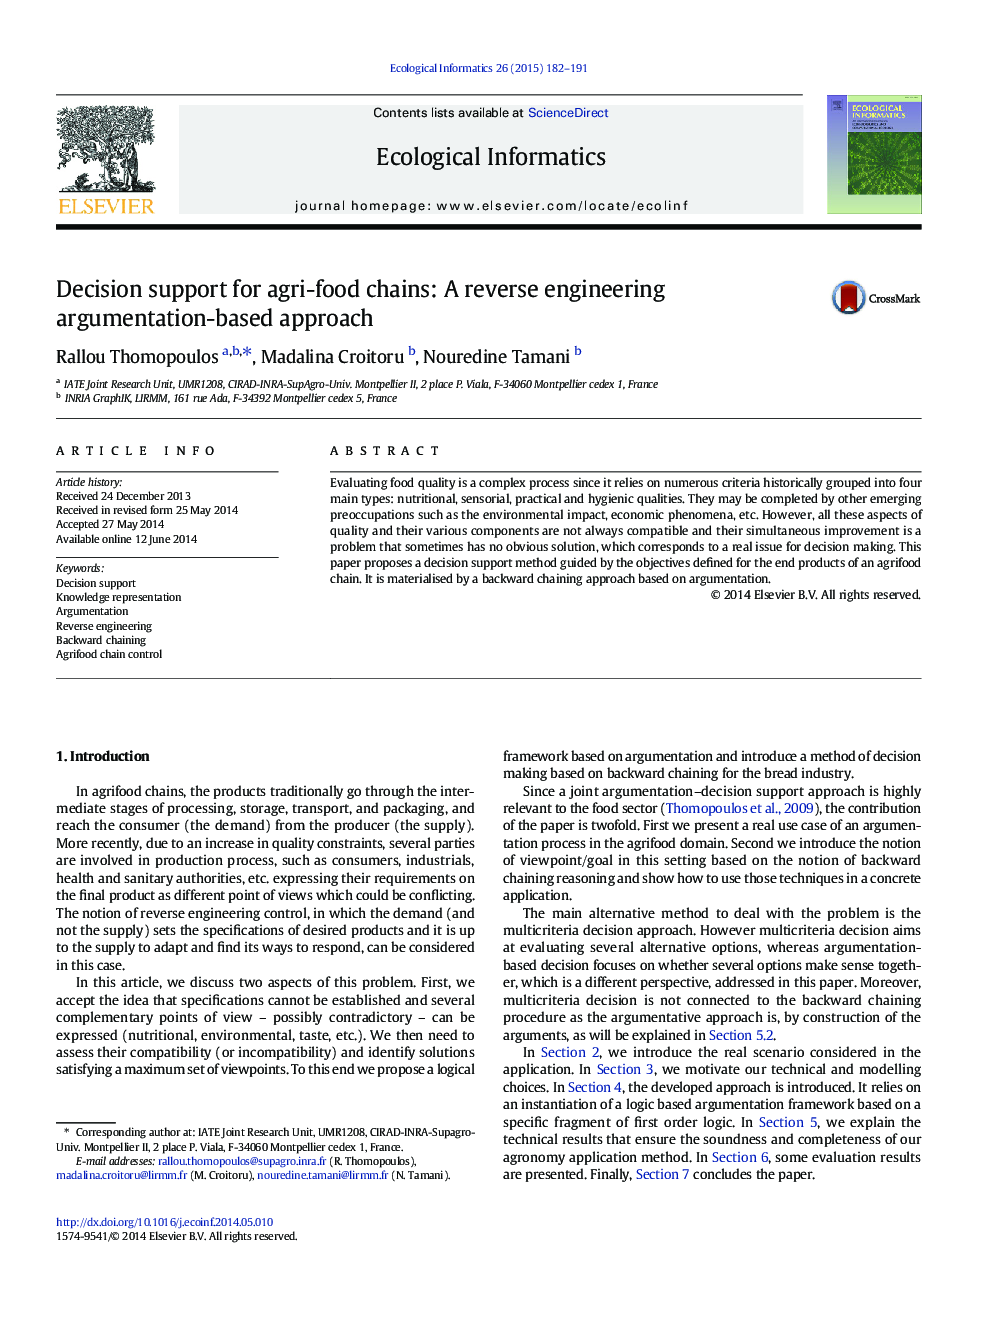 Decision support for agri-food chains: A reverse engineering argumentation-based approach